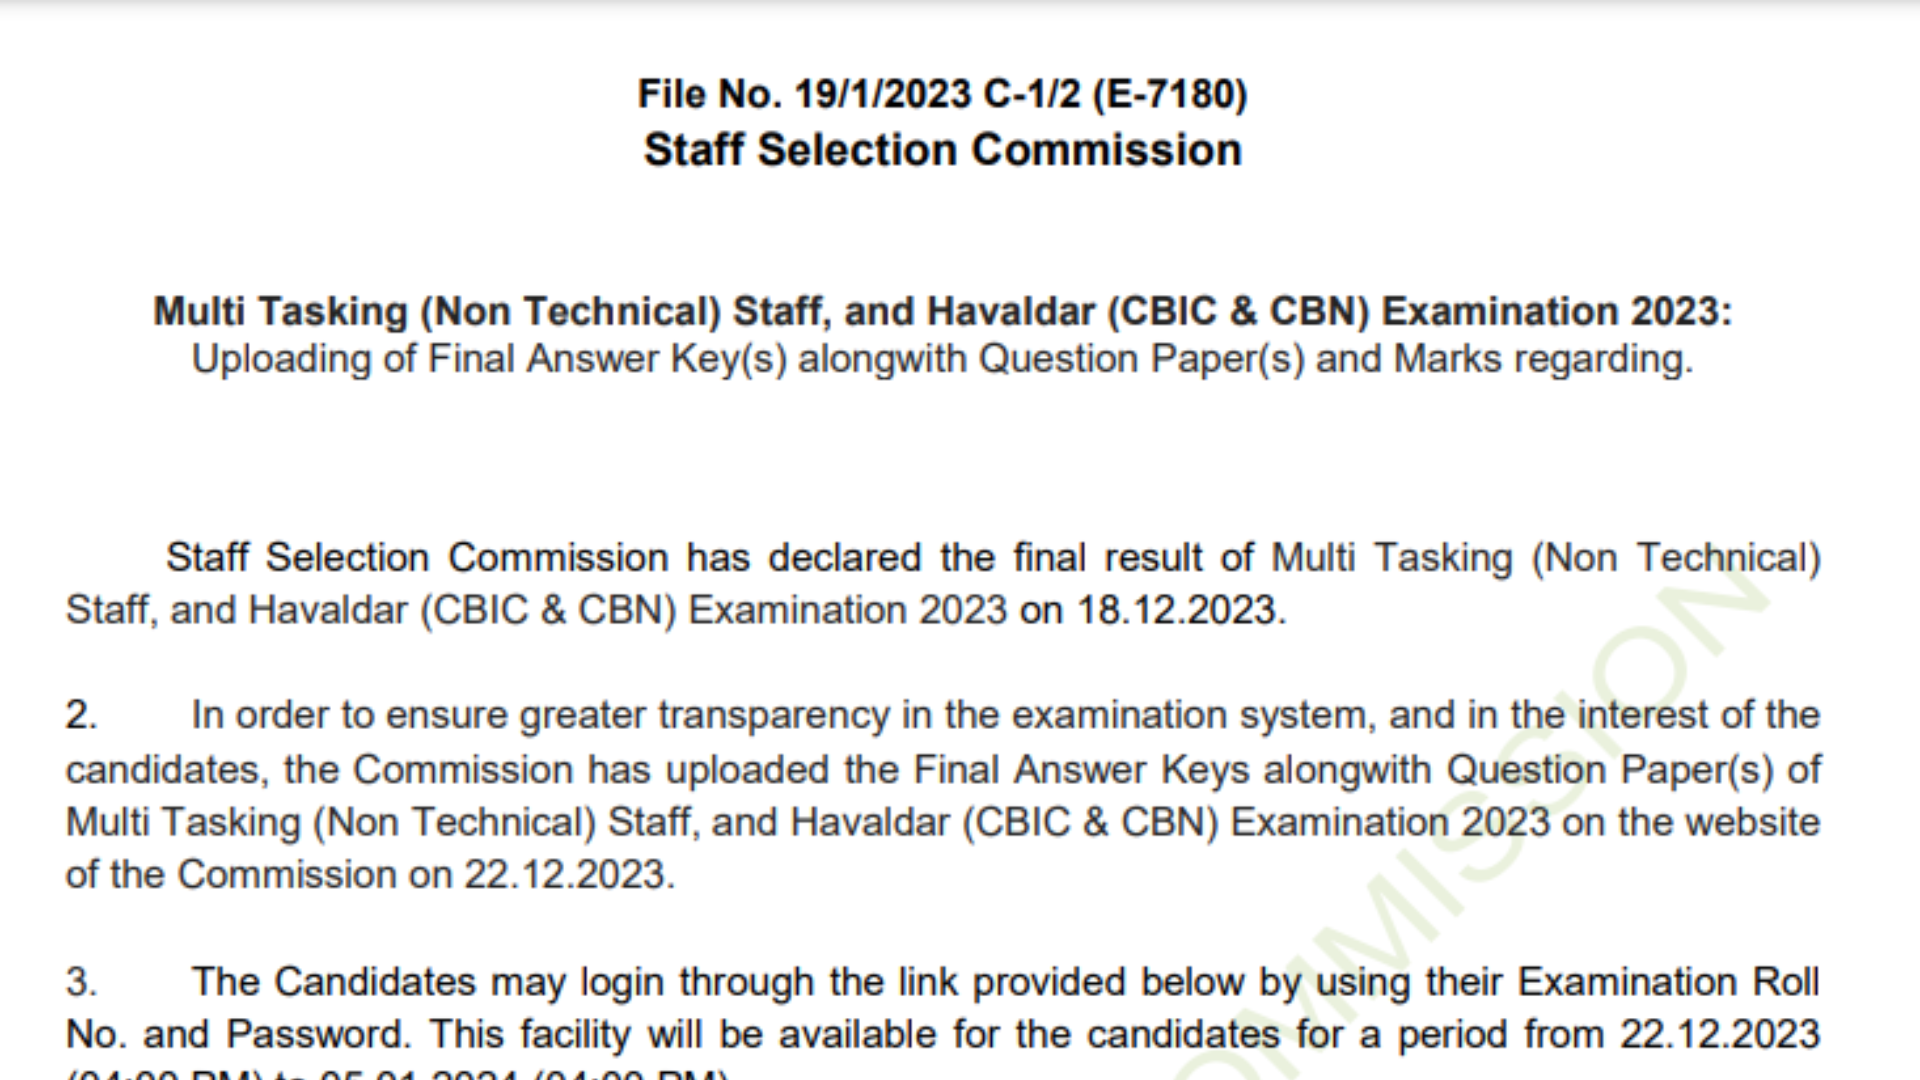 SSC Multi-Tasking (Non-Technical) Staff, and Havaldar (CBIC & CBN) Exam 2023 Final Result, Marks, Final Answer Key